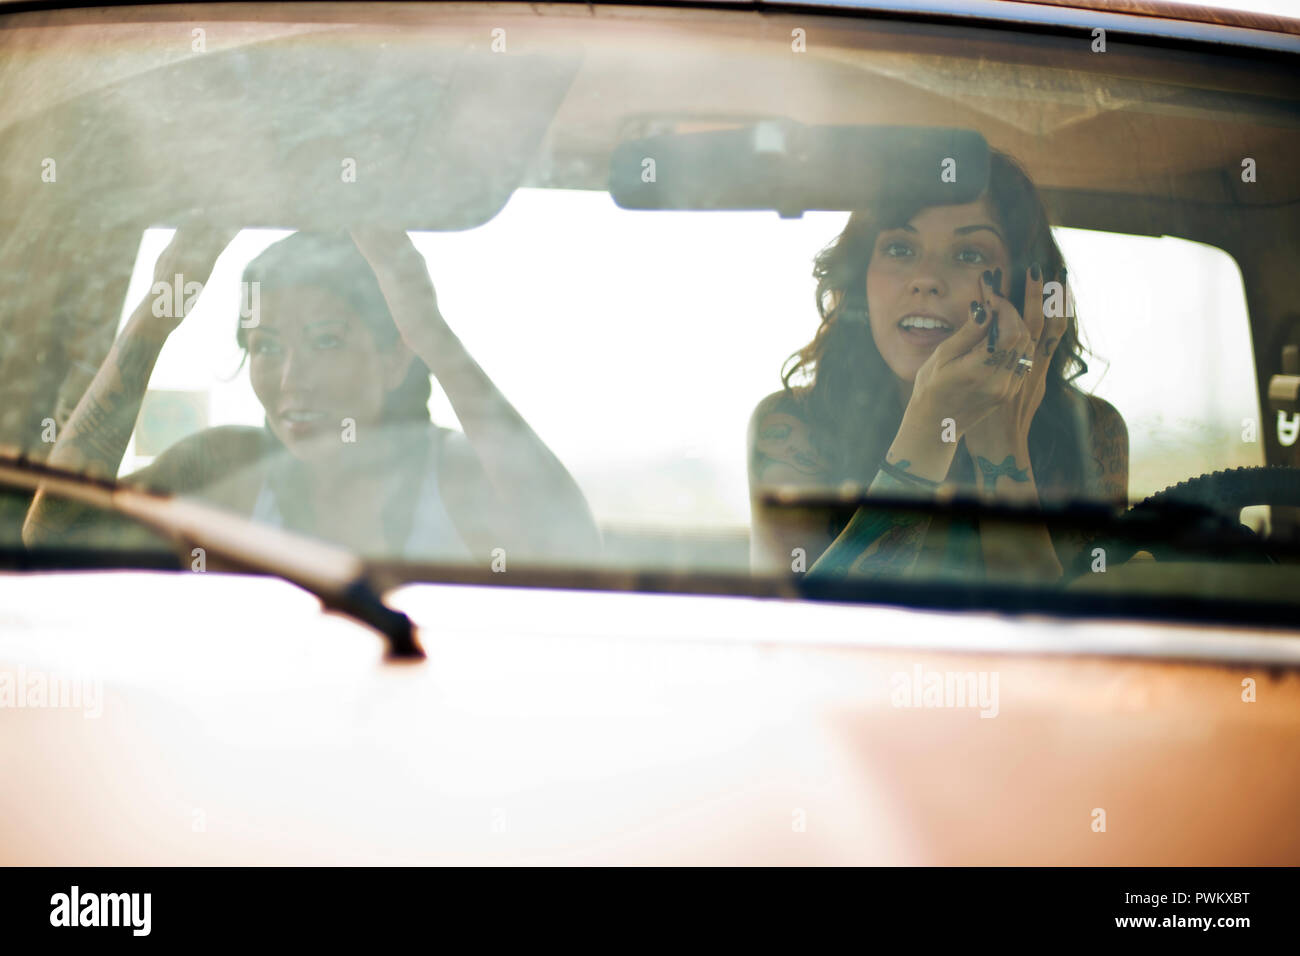 Two female friends sitting in a pick-up truck, applying makeup in the rear view mirror. Stock Photo